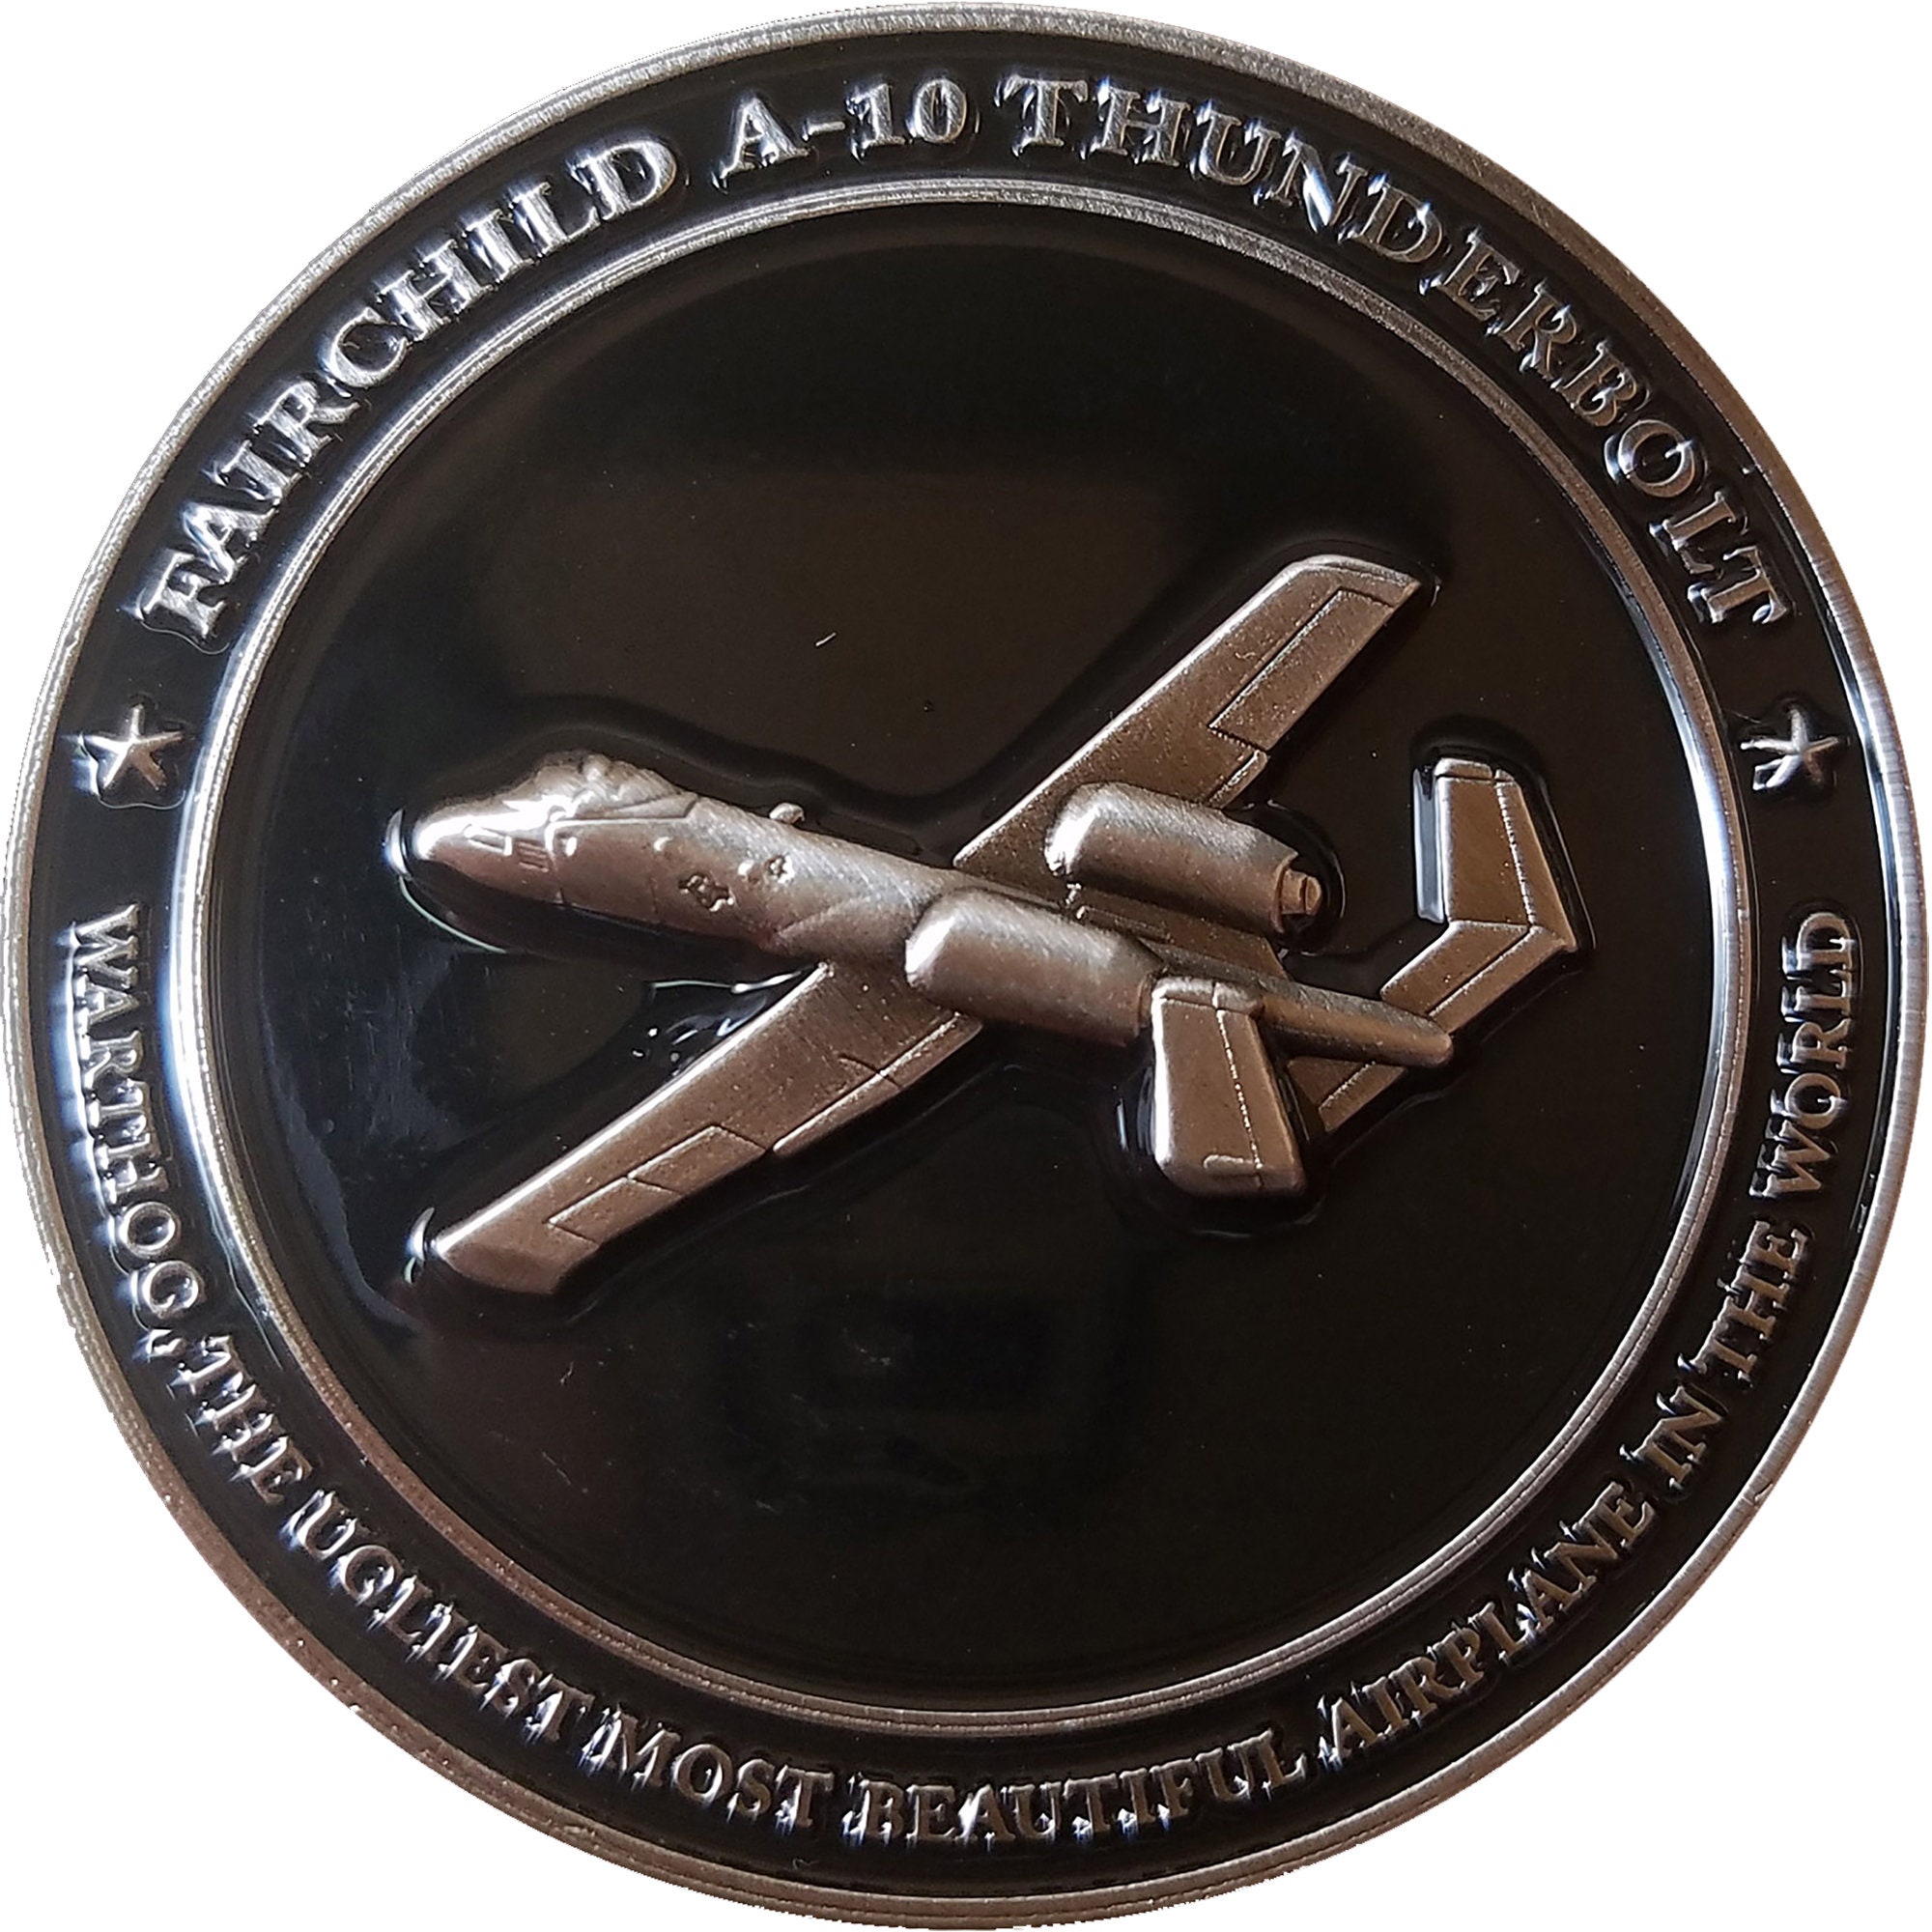 Details about   FAIRCHILD A-10 WART HOG THUNDERBOLT CHALLENGE COIN LIMITED EDITION 19 